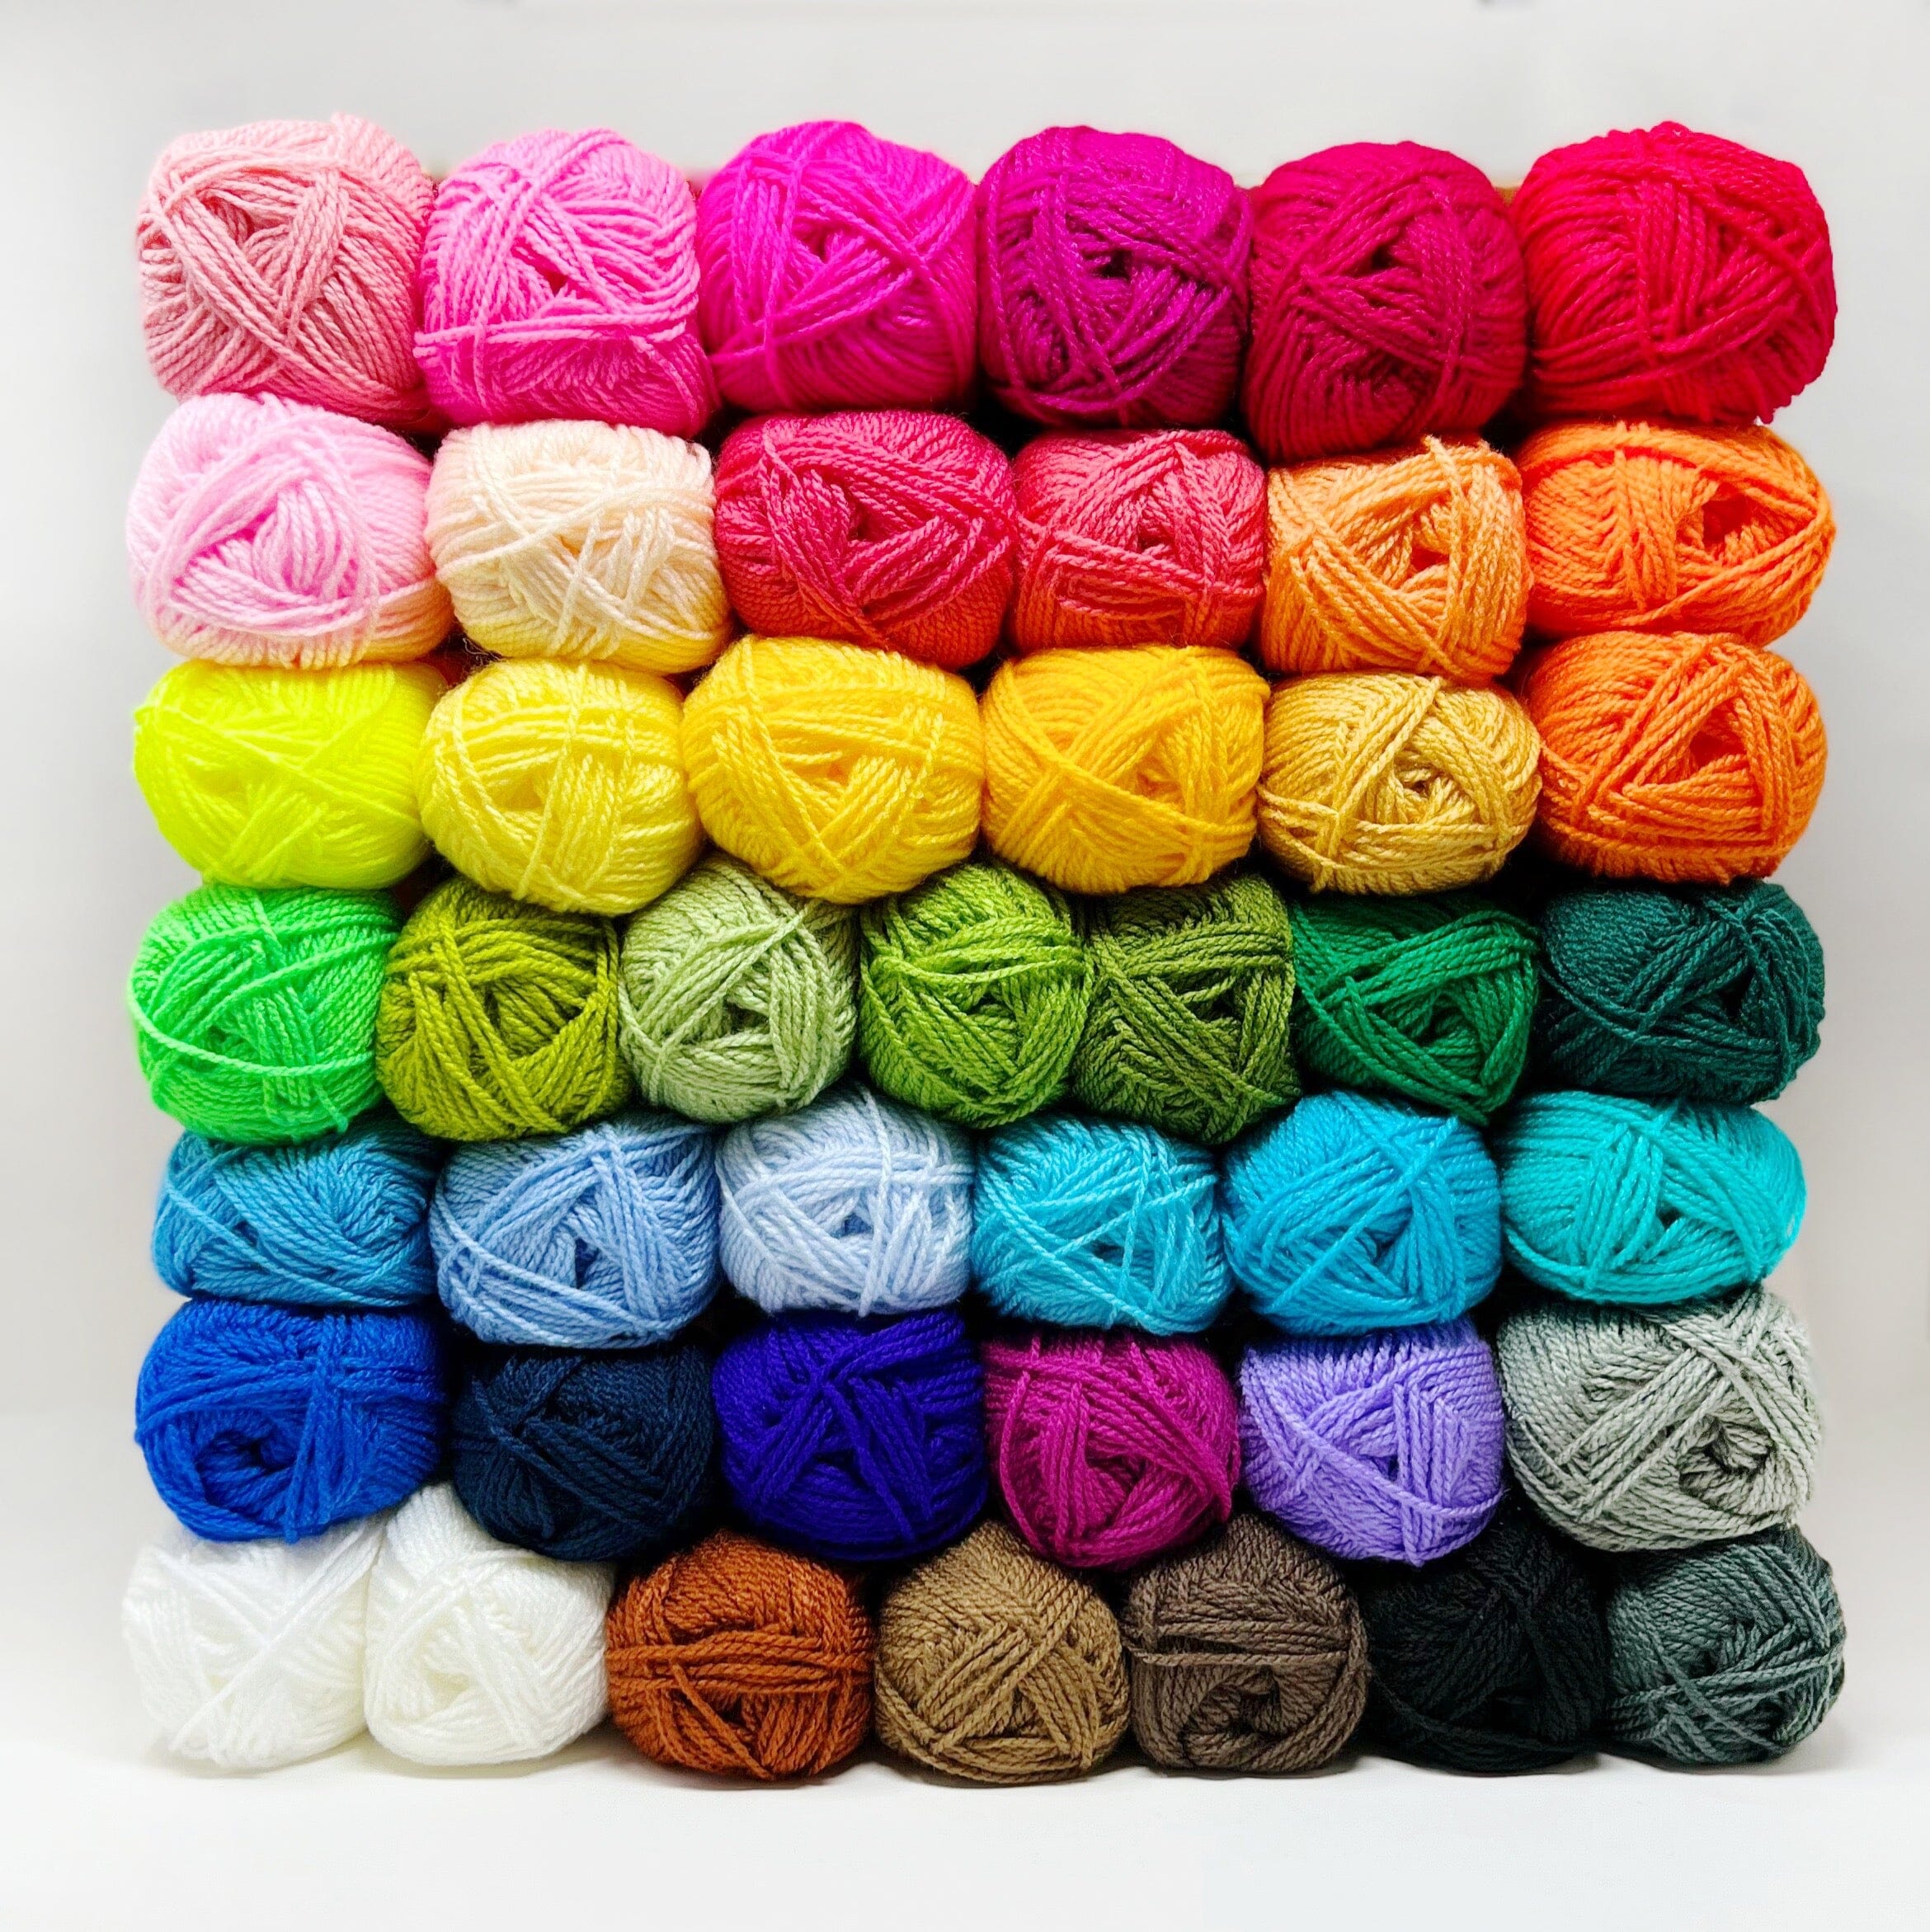 MULTICOLORED RAINBOW YARN Skein Perfect for Making Decorative Gadgets and  Toy $11.47 - PicClick AU